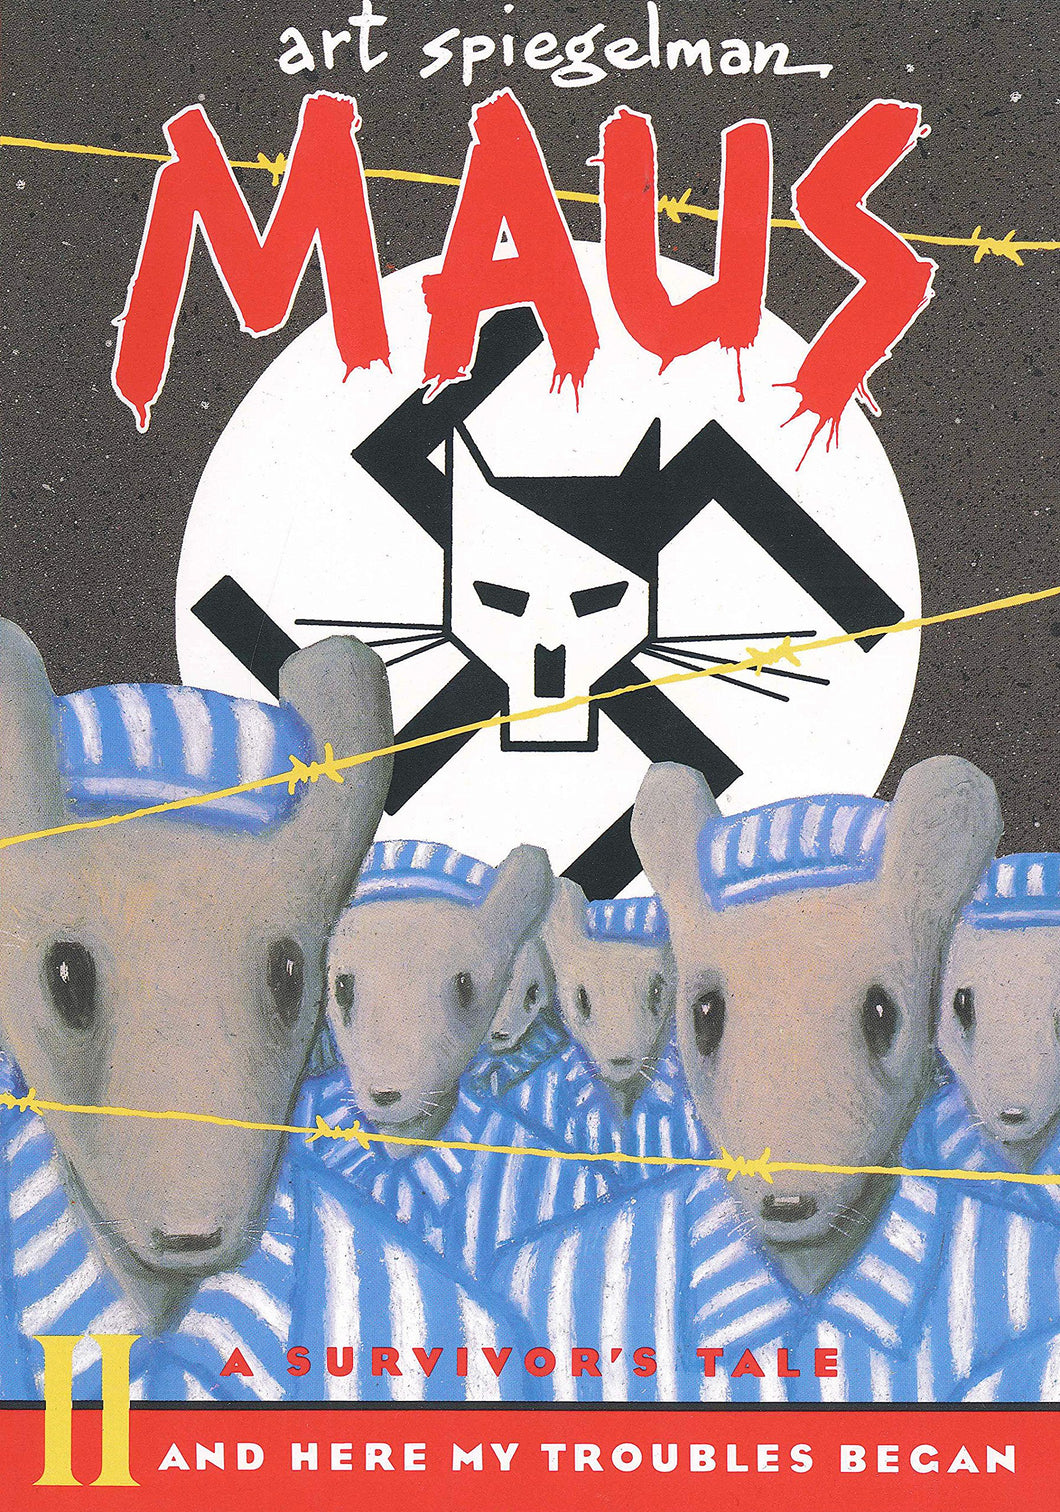 Maus - A Survivor's Tale #2 - And Here My Troubles Began by Art Spiegelman